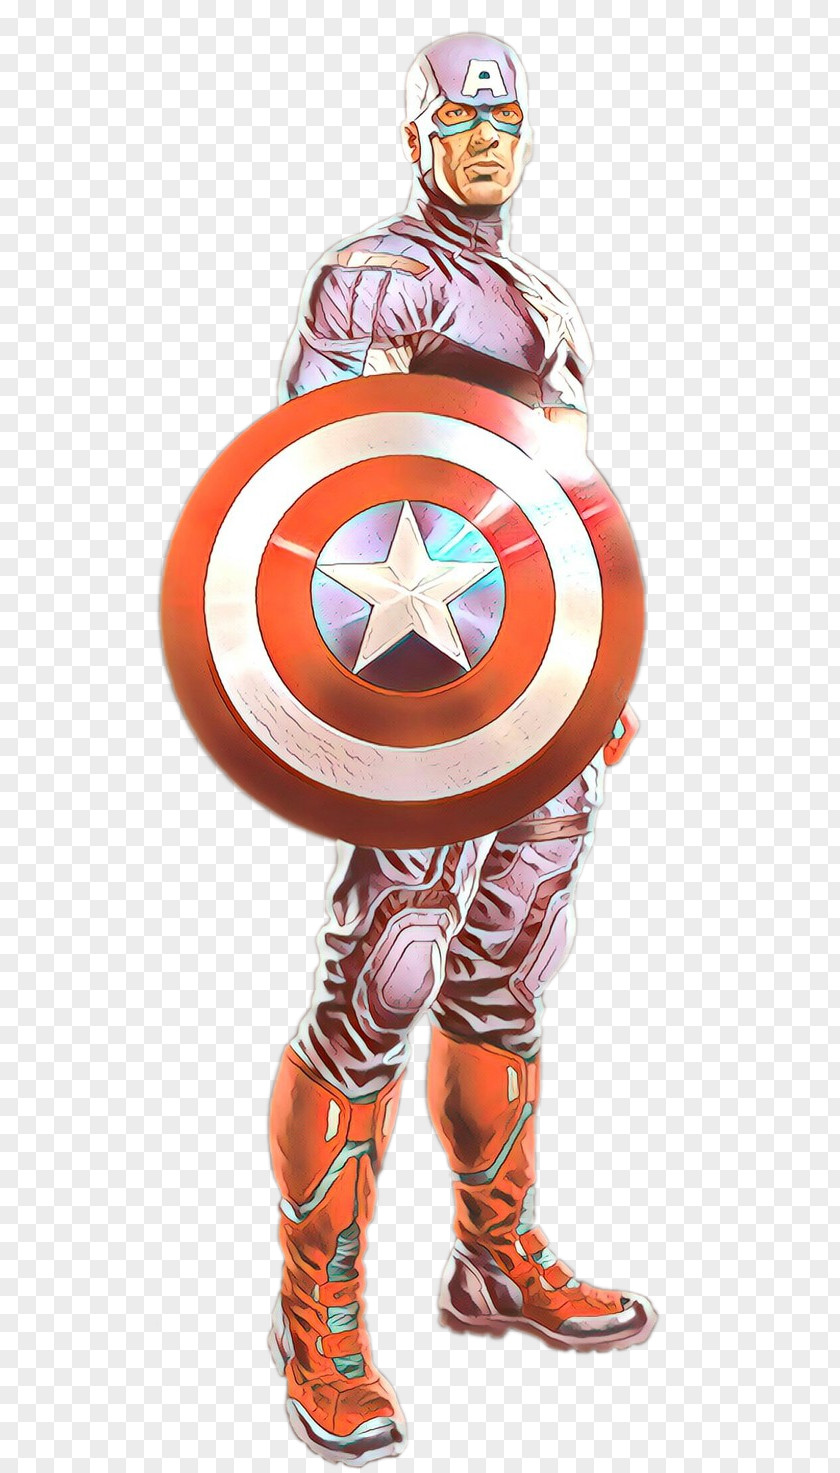 Captain America: The First Avenger Costume Cartoon Orange S.A. PNG